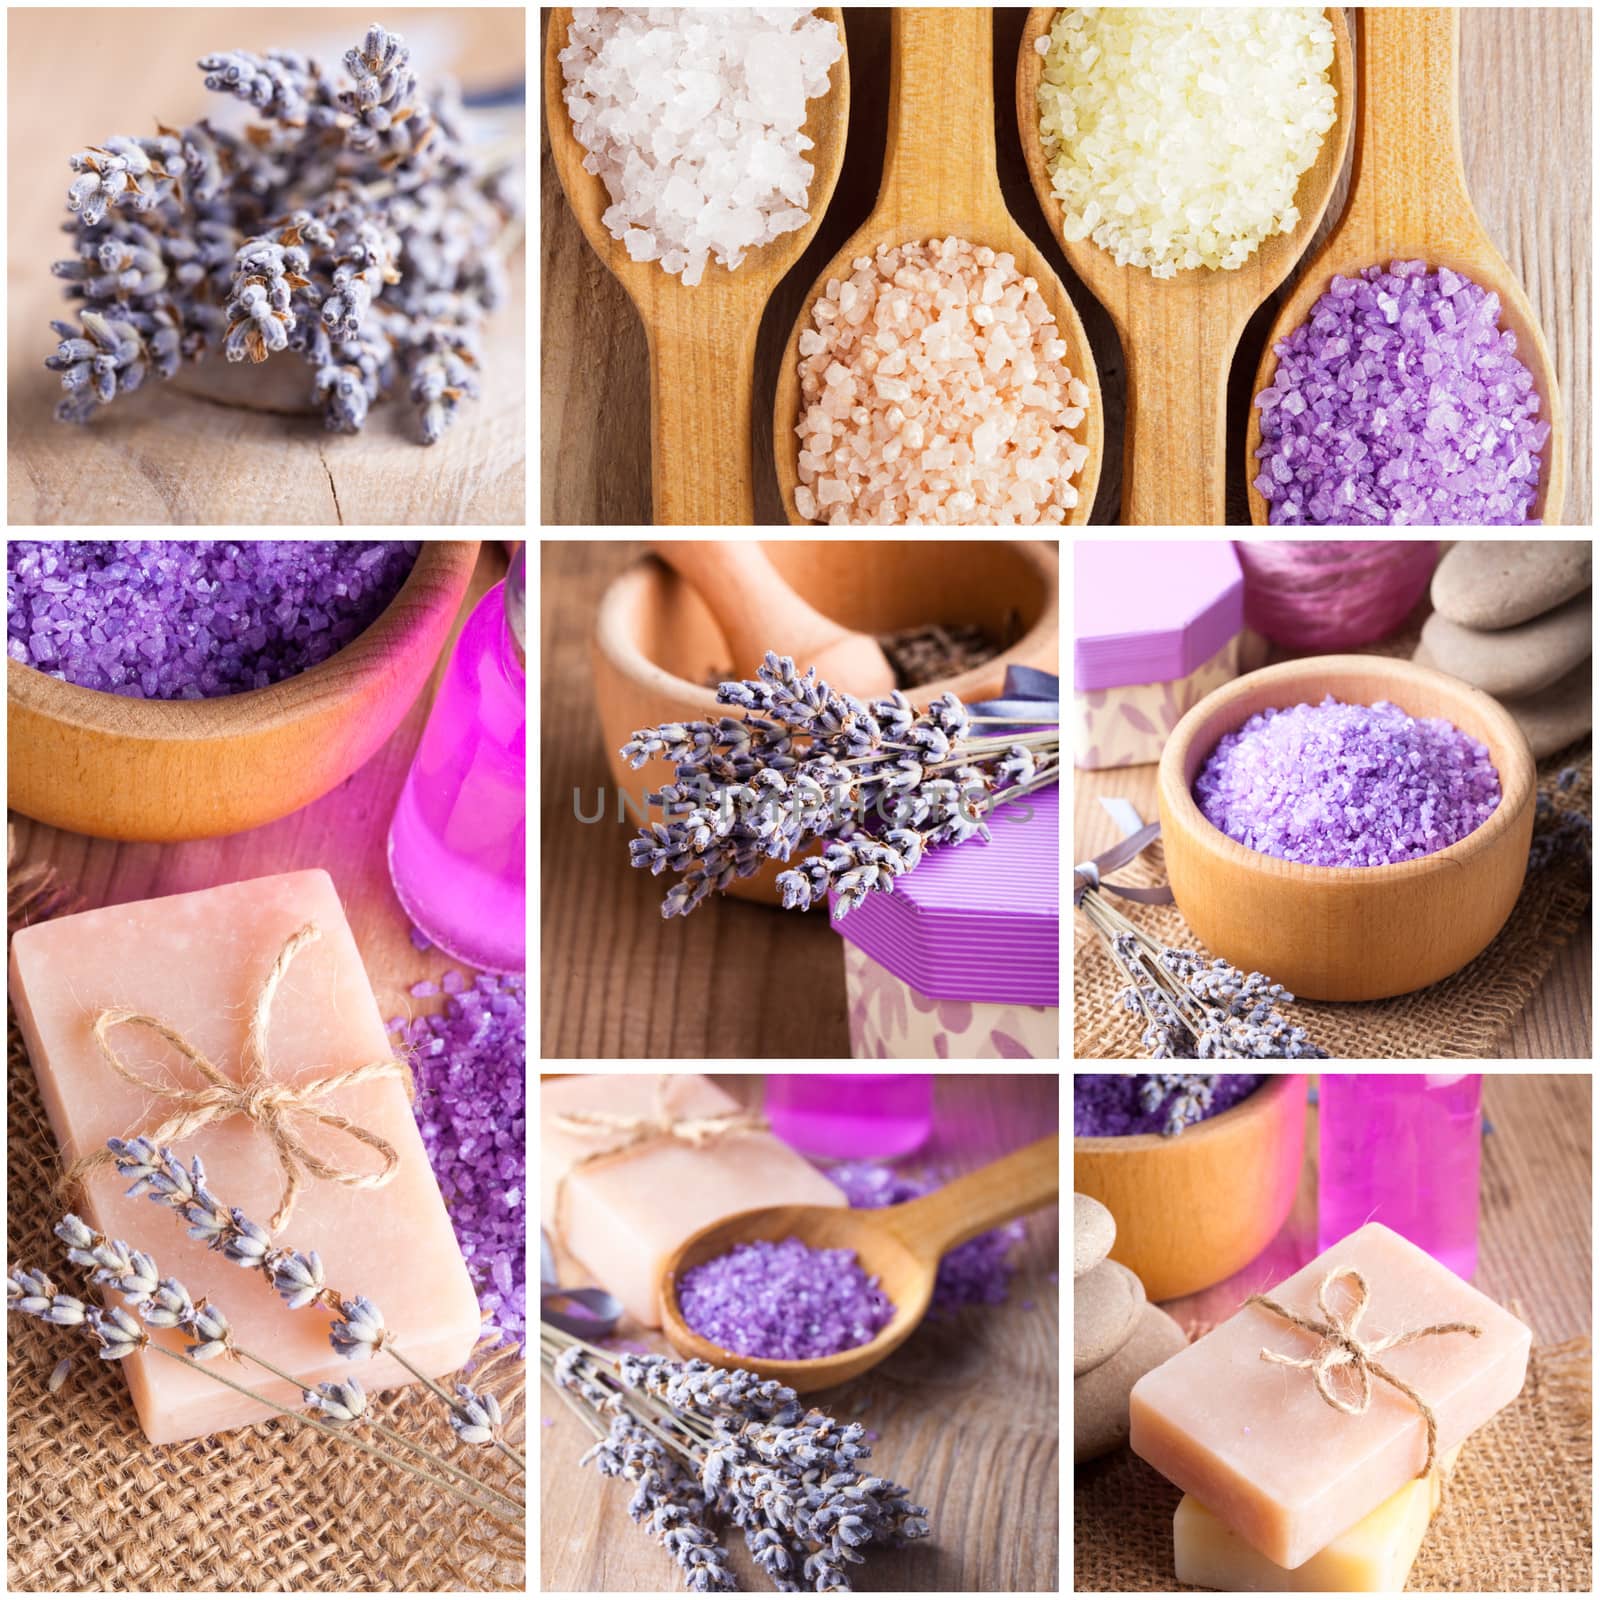 Lavender treatment soap and sea salt on wooden table